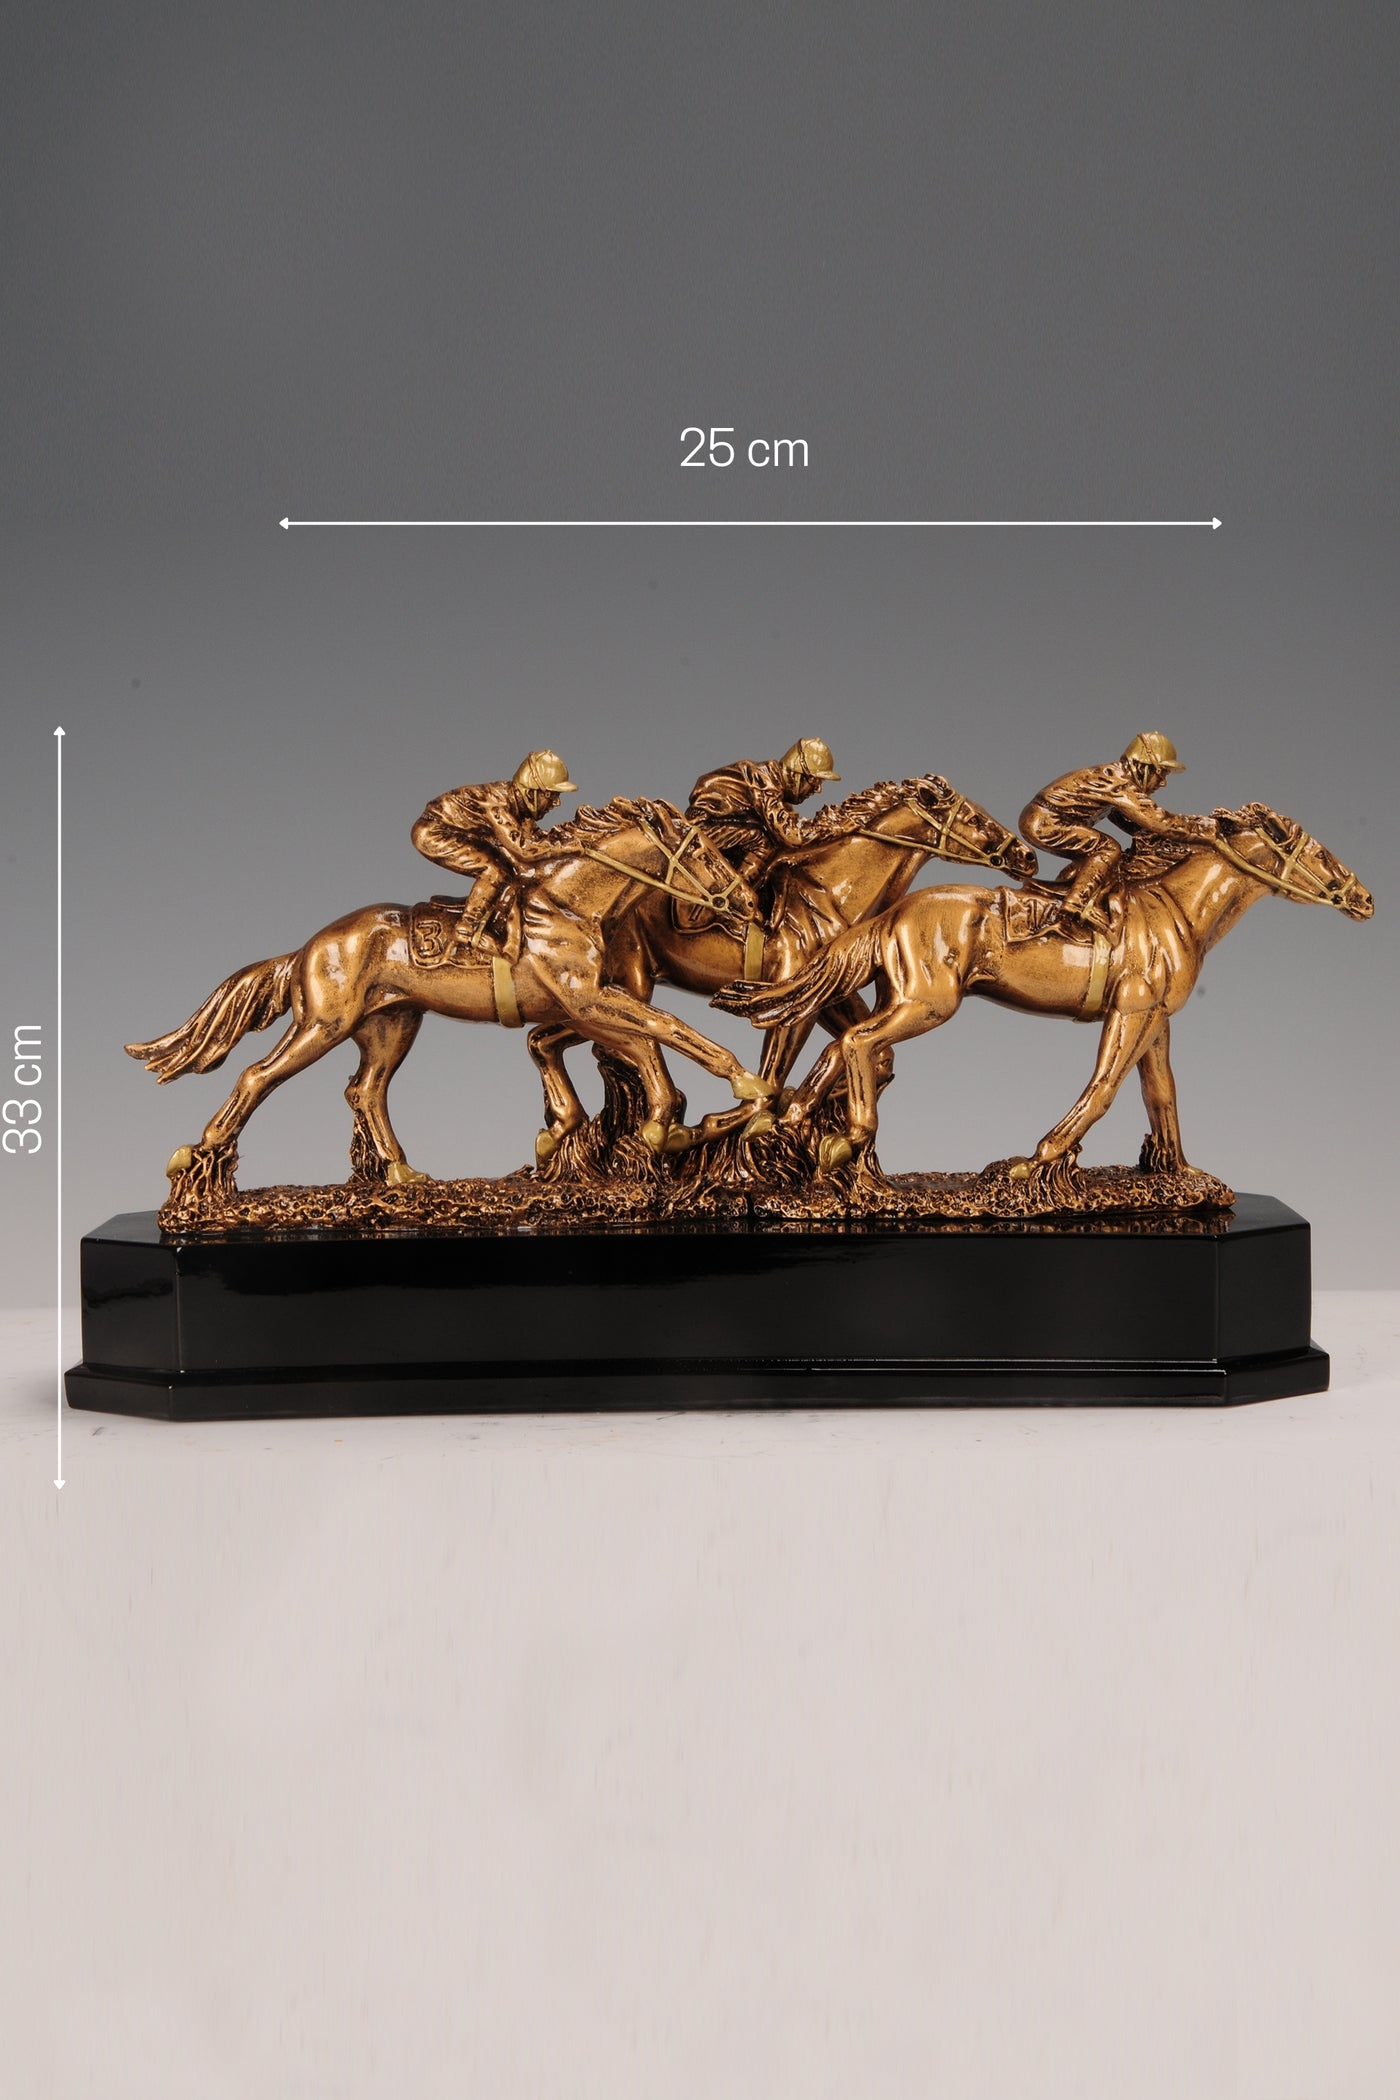 Triple Race Horse Showpiece for your home or office Decor